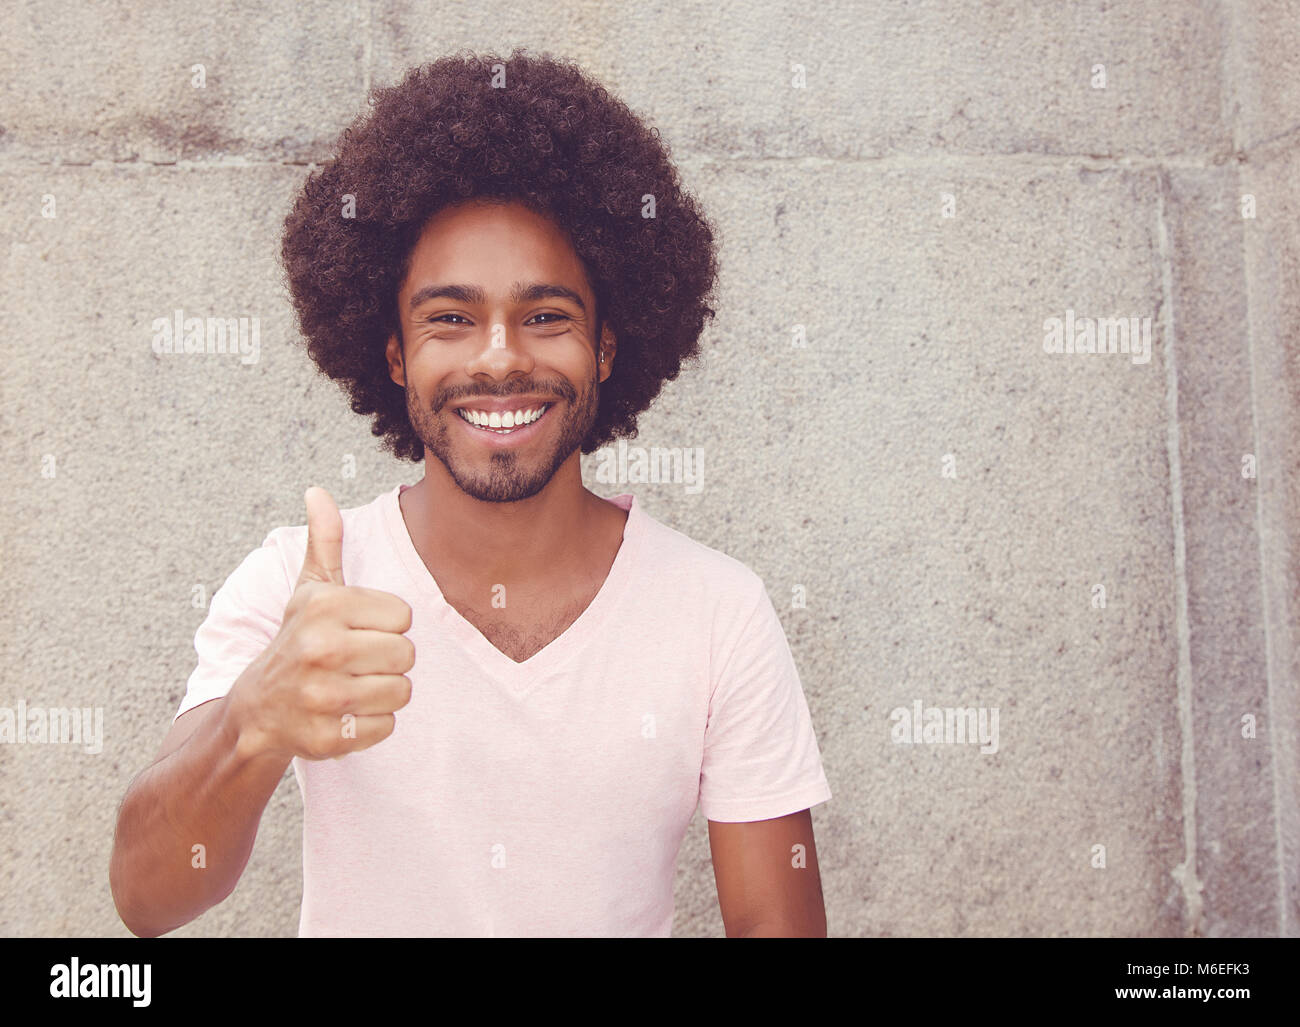 African american hipster man showing thumb up outdoors in vintage retro look Stock Photo